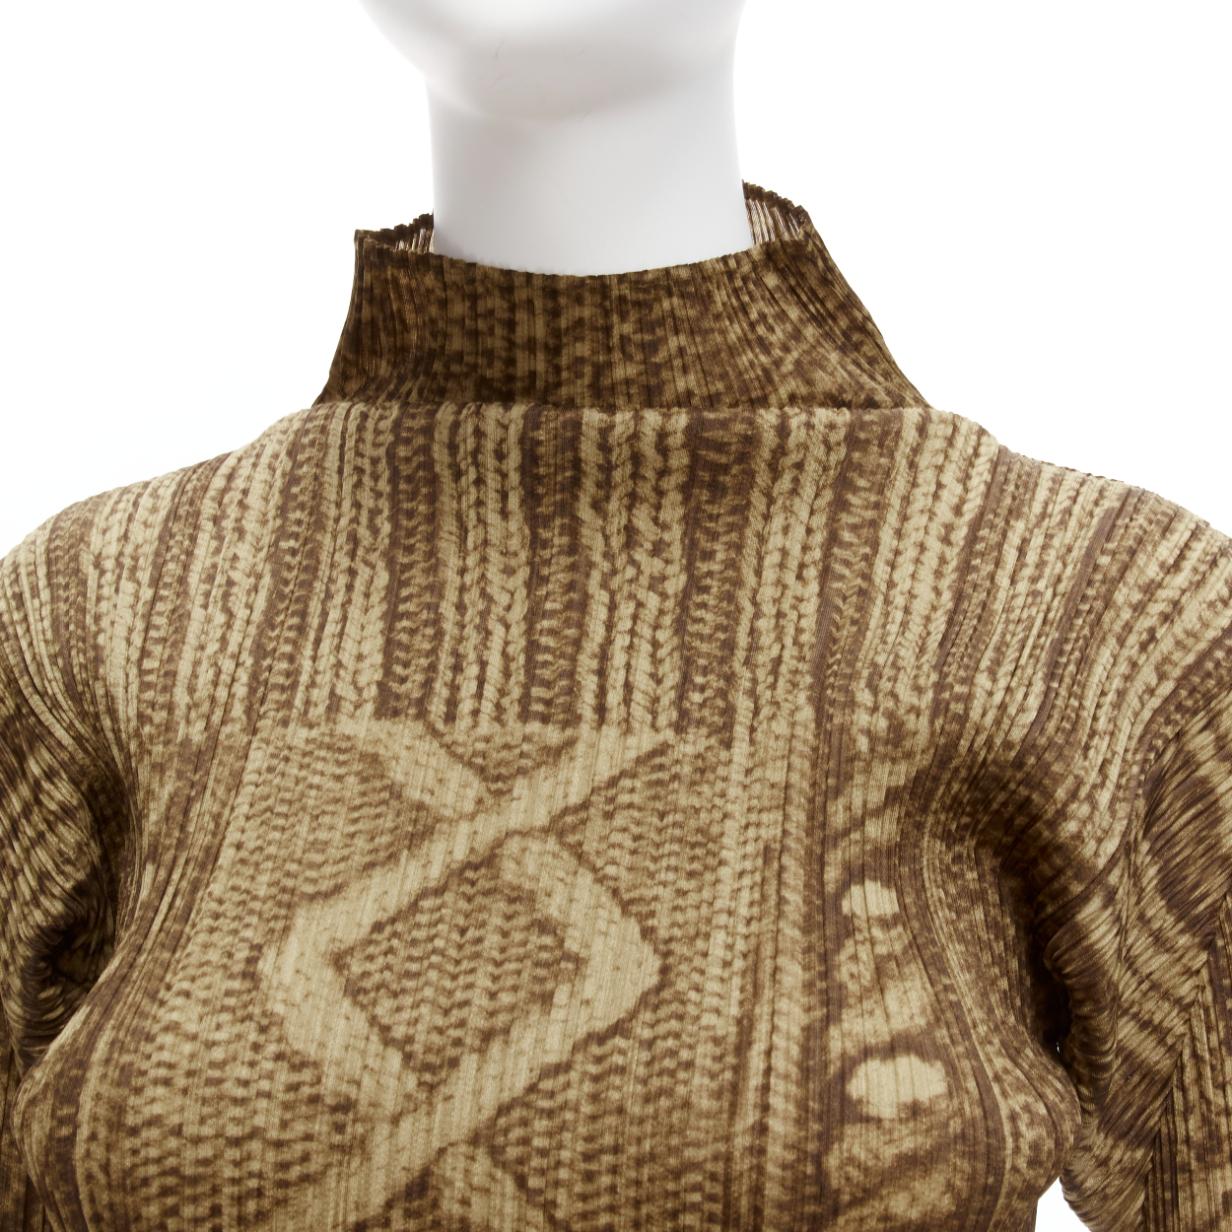 PLEATS PLEASE ISSEY MIYAKE brown Tromp Loeil cable knit print plisse top
Reference: TGAS/D00330
Brand: Issey Miyake
Material: Feels like polyester
Color: Brown
Pattern: Photographic Print
Closure: Pullover

CONDITION:
Condition: Excellent, this item